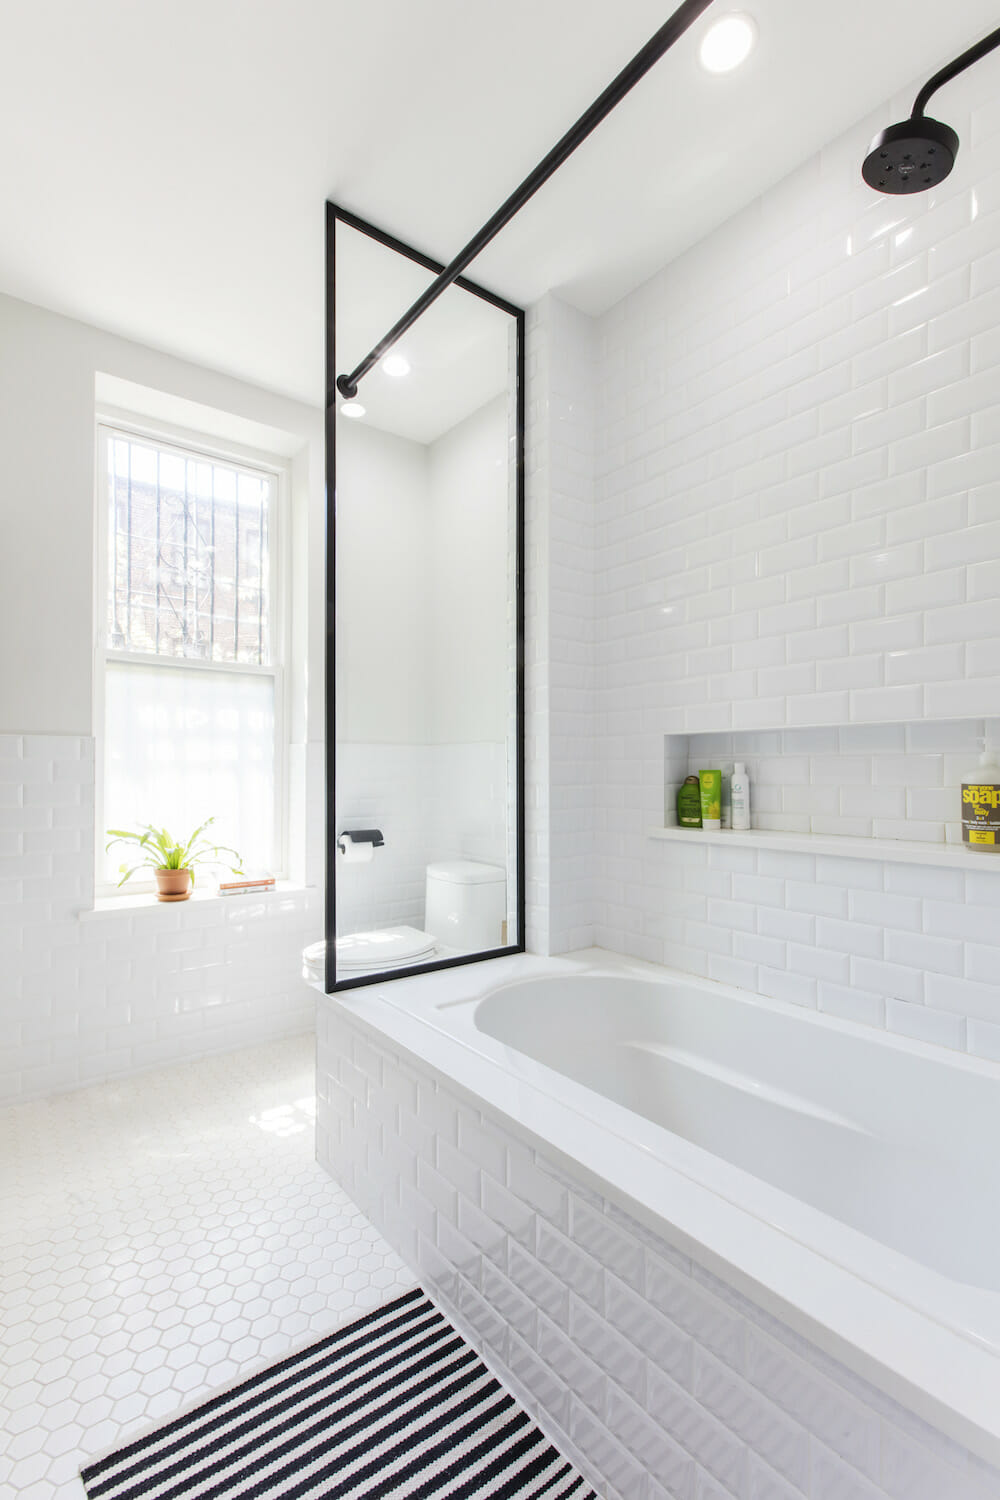 Image of a renovated bathroom with white subway tile and bathtub